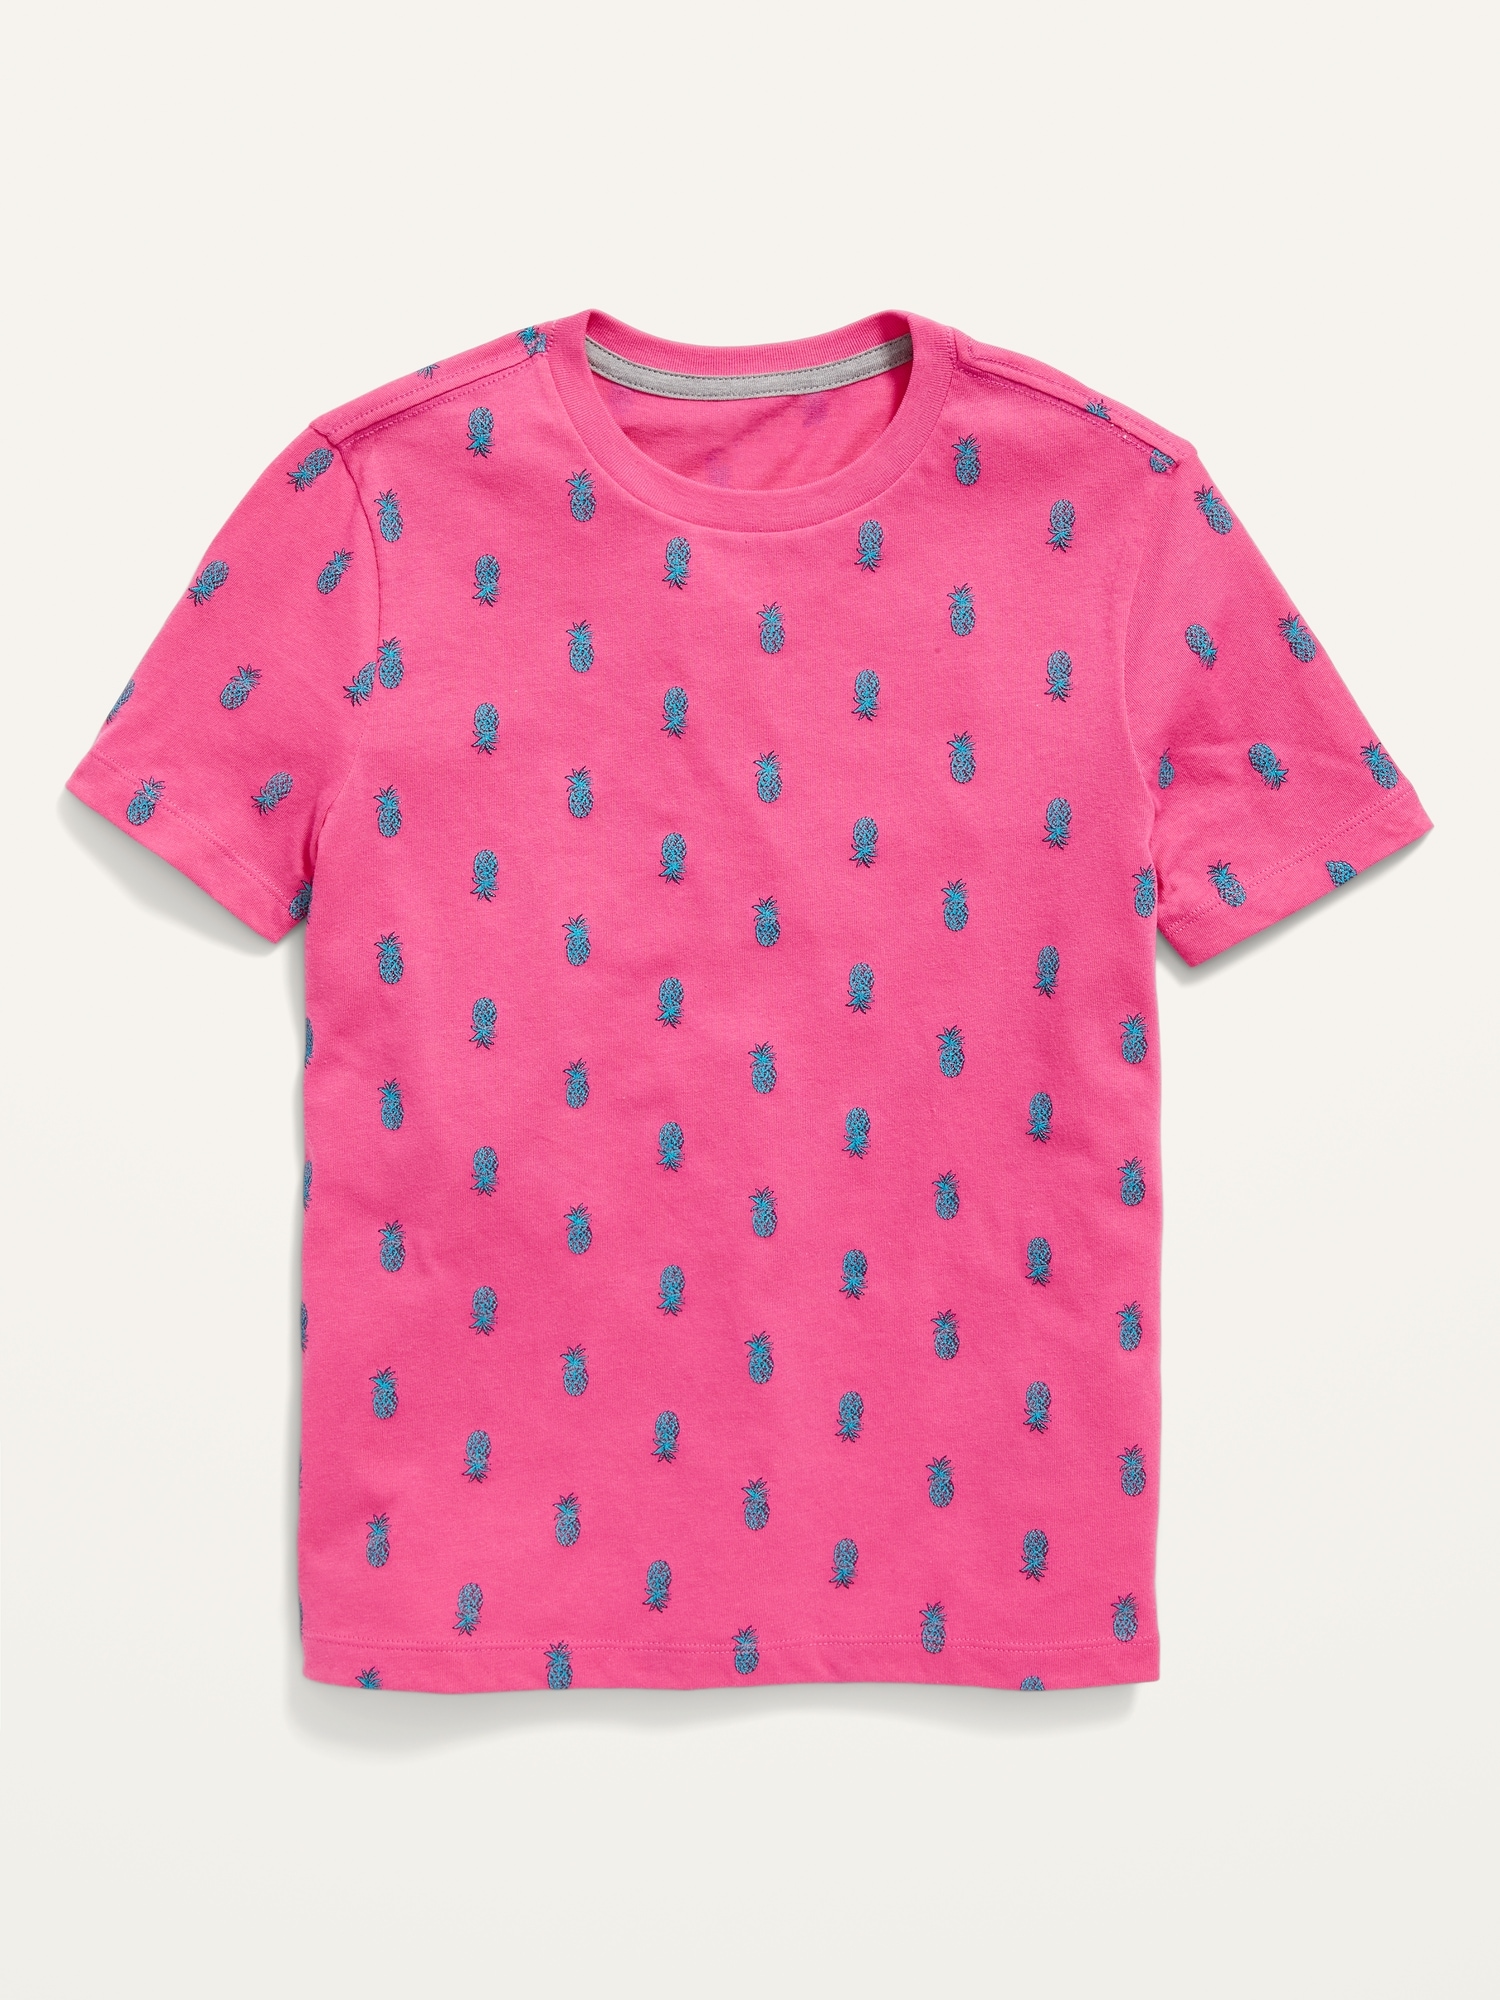 Old Navy Softest Printed Crew-Neck T-Shirt for Boys pink. 1